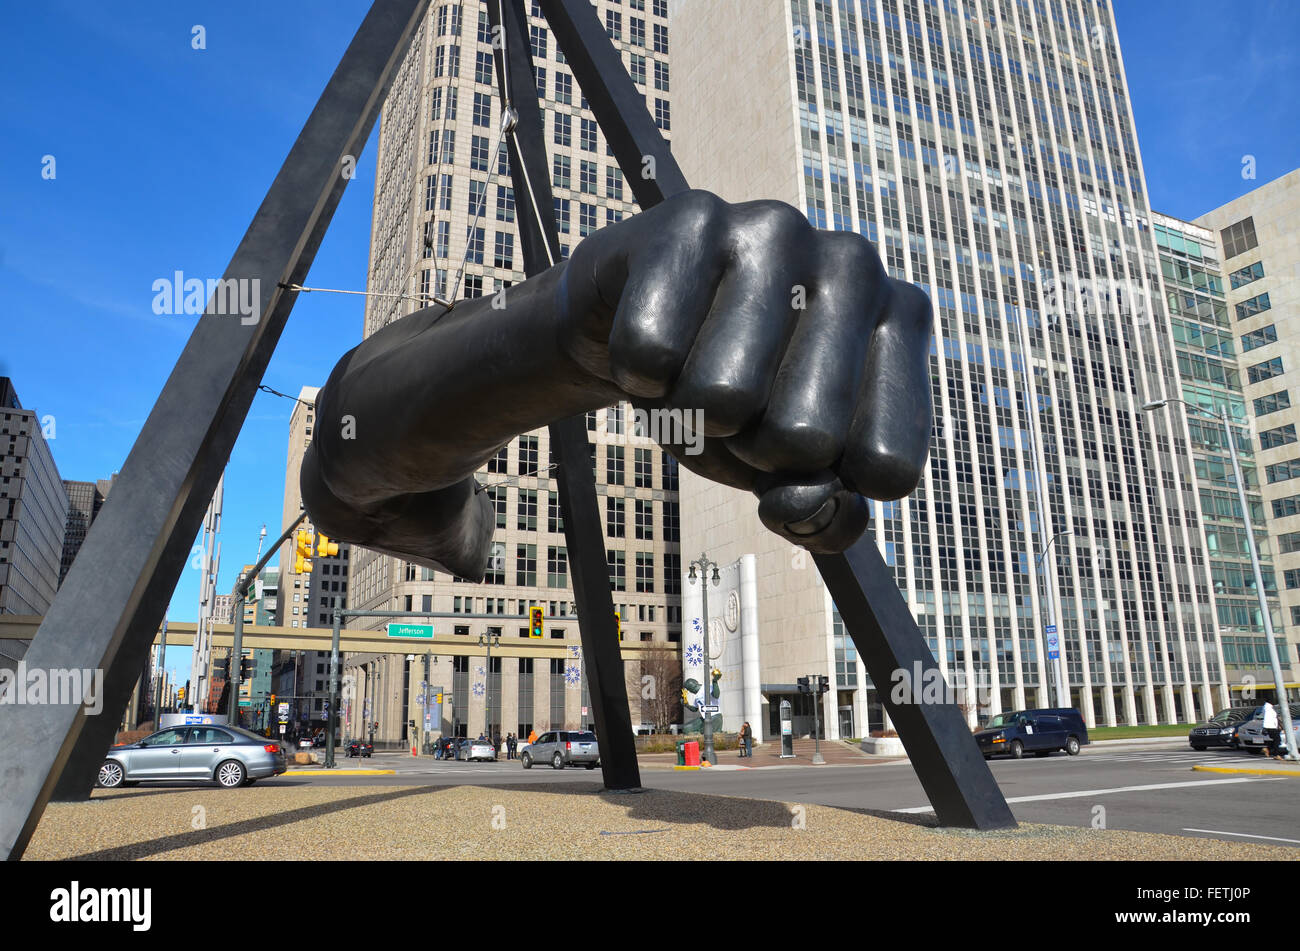 DETROIT, MI - DECEMBER 24: 'The Fist,' a monument to Joe Louis in Detroit, MI, shown here on December 24, 2015, is the work of s Stock Photo